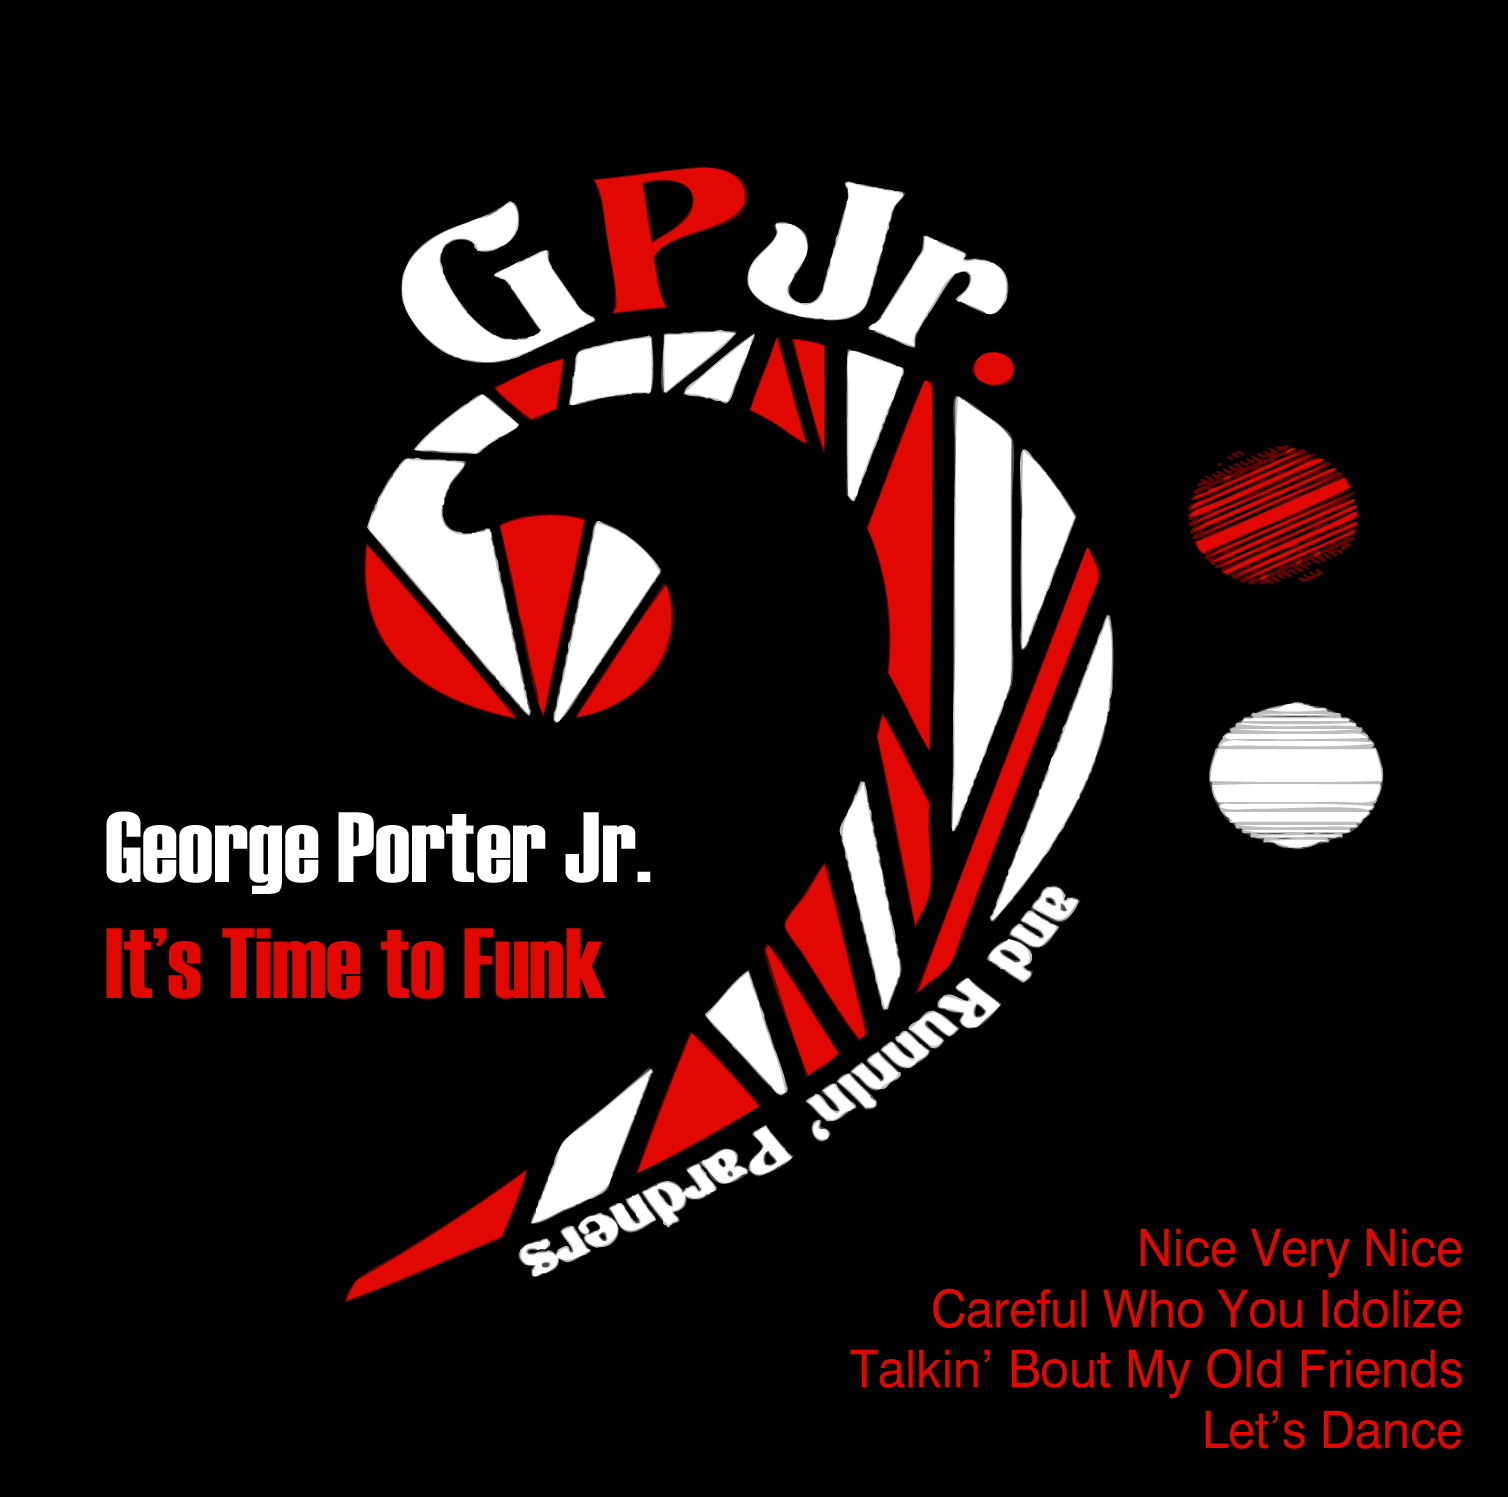 George Porter Jr. & The Runnin’ Pardners – It’s Time To Funk